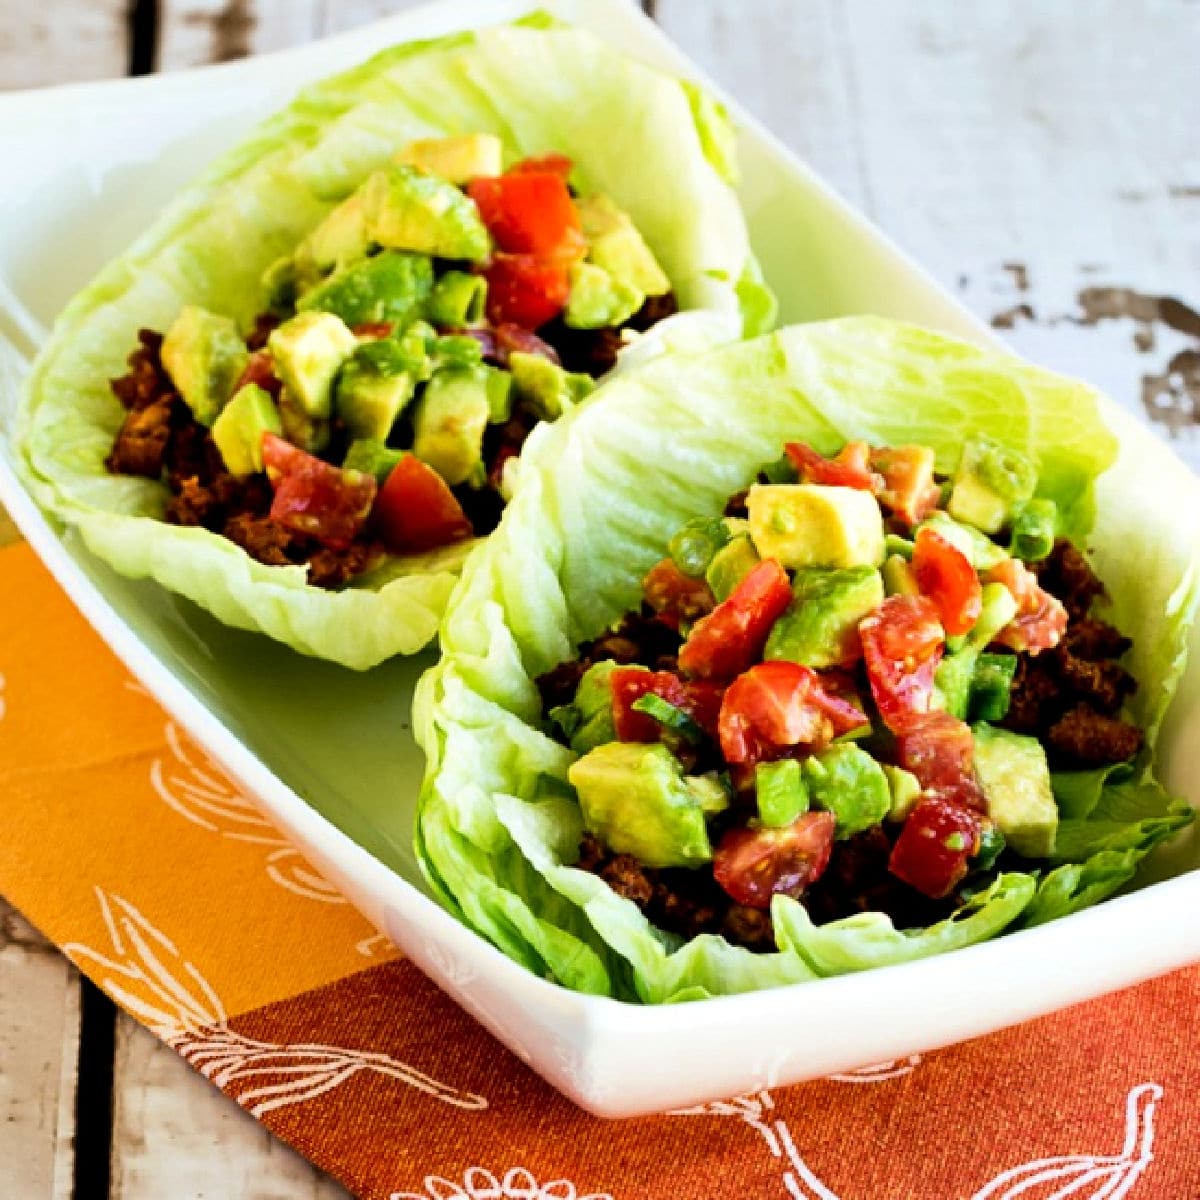 Square image of Tofu Tacos shown in lettuce wraps.